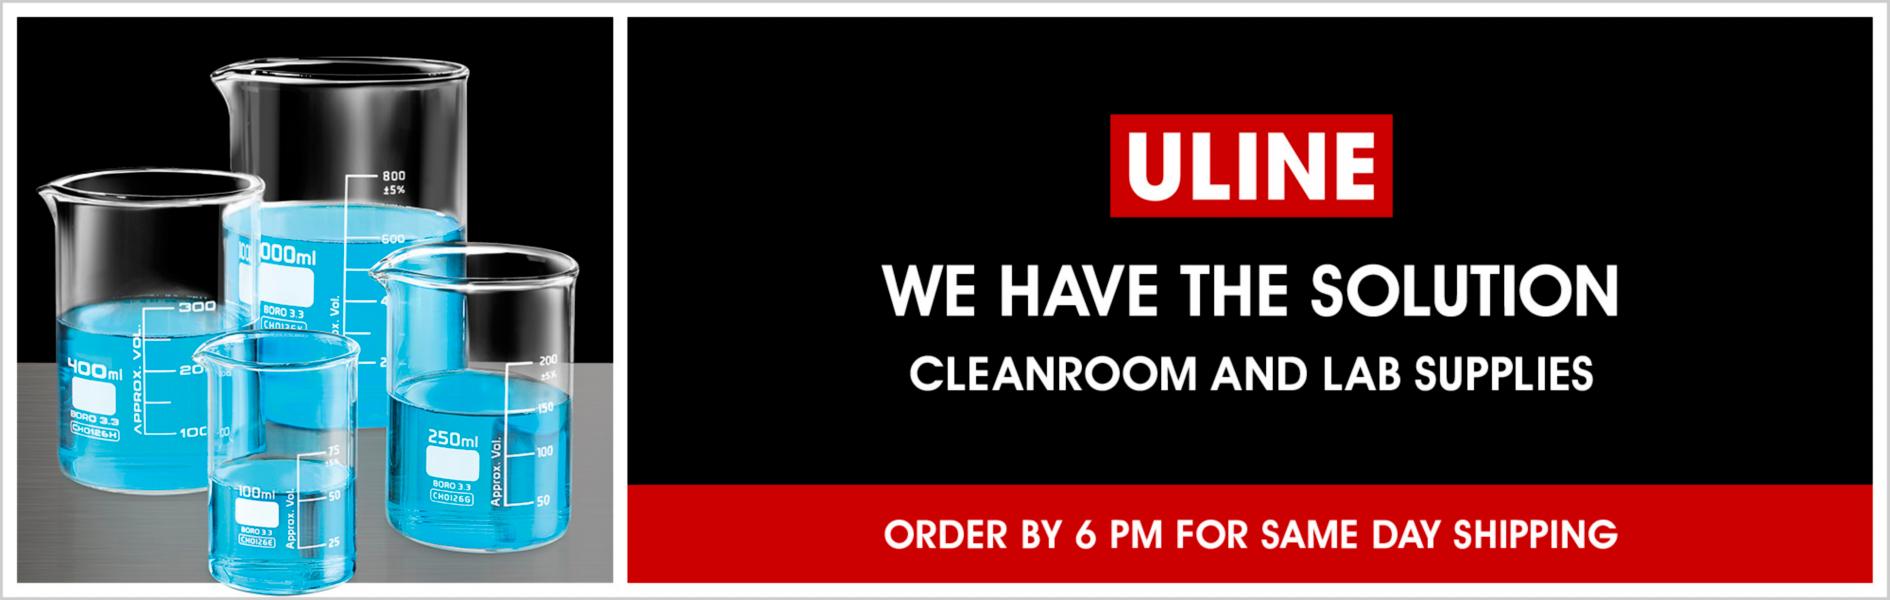 Uline: Cleanroom and Lab Supplies